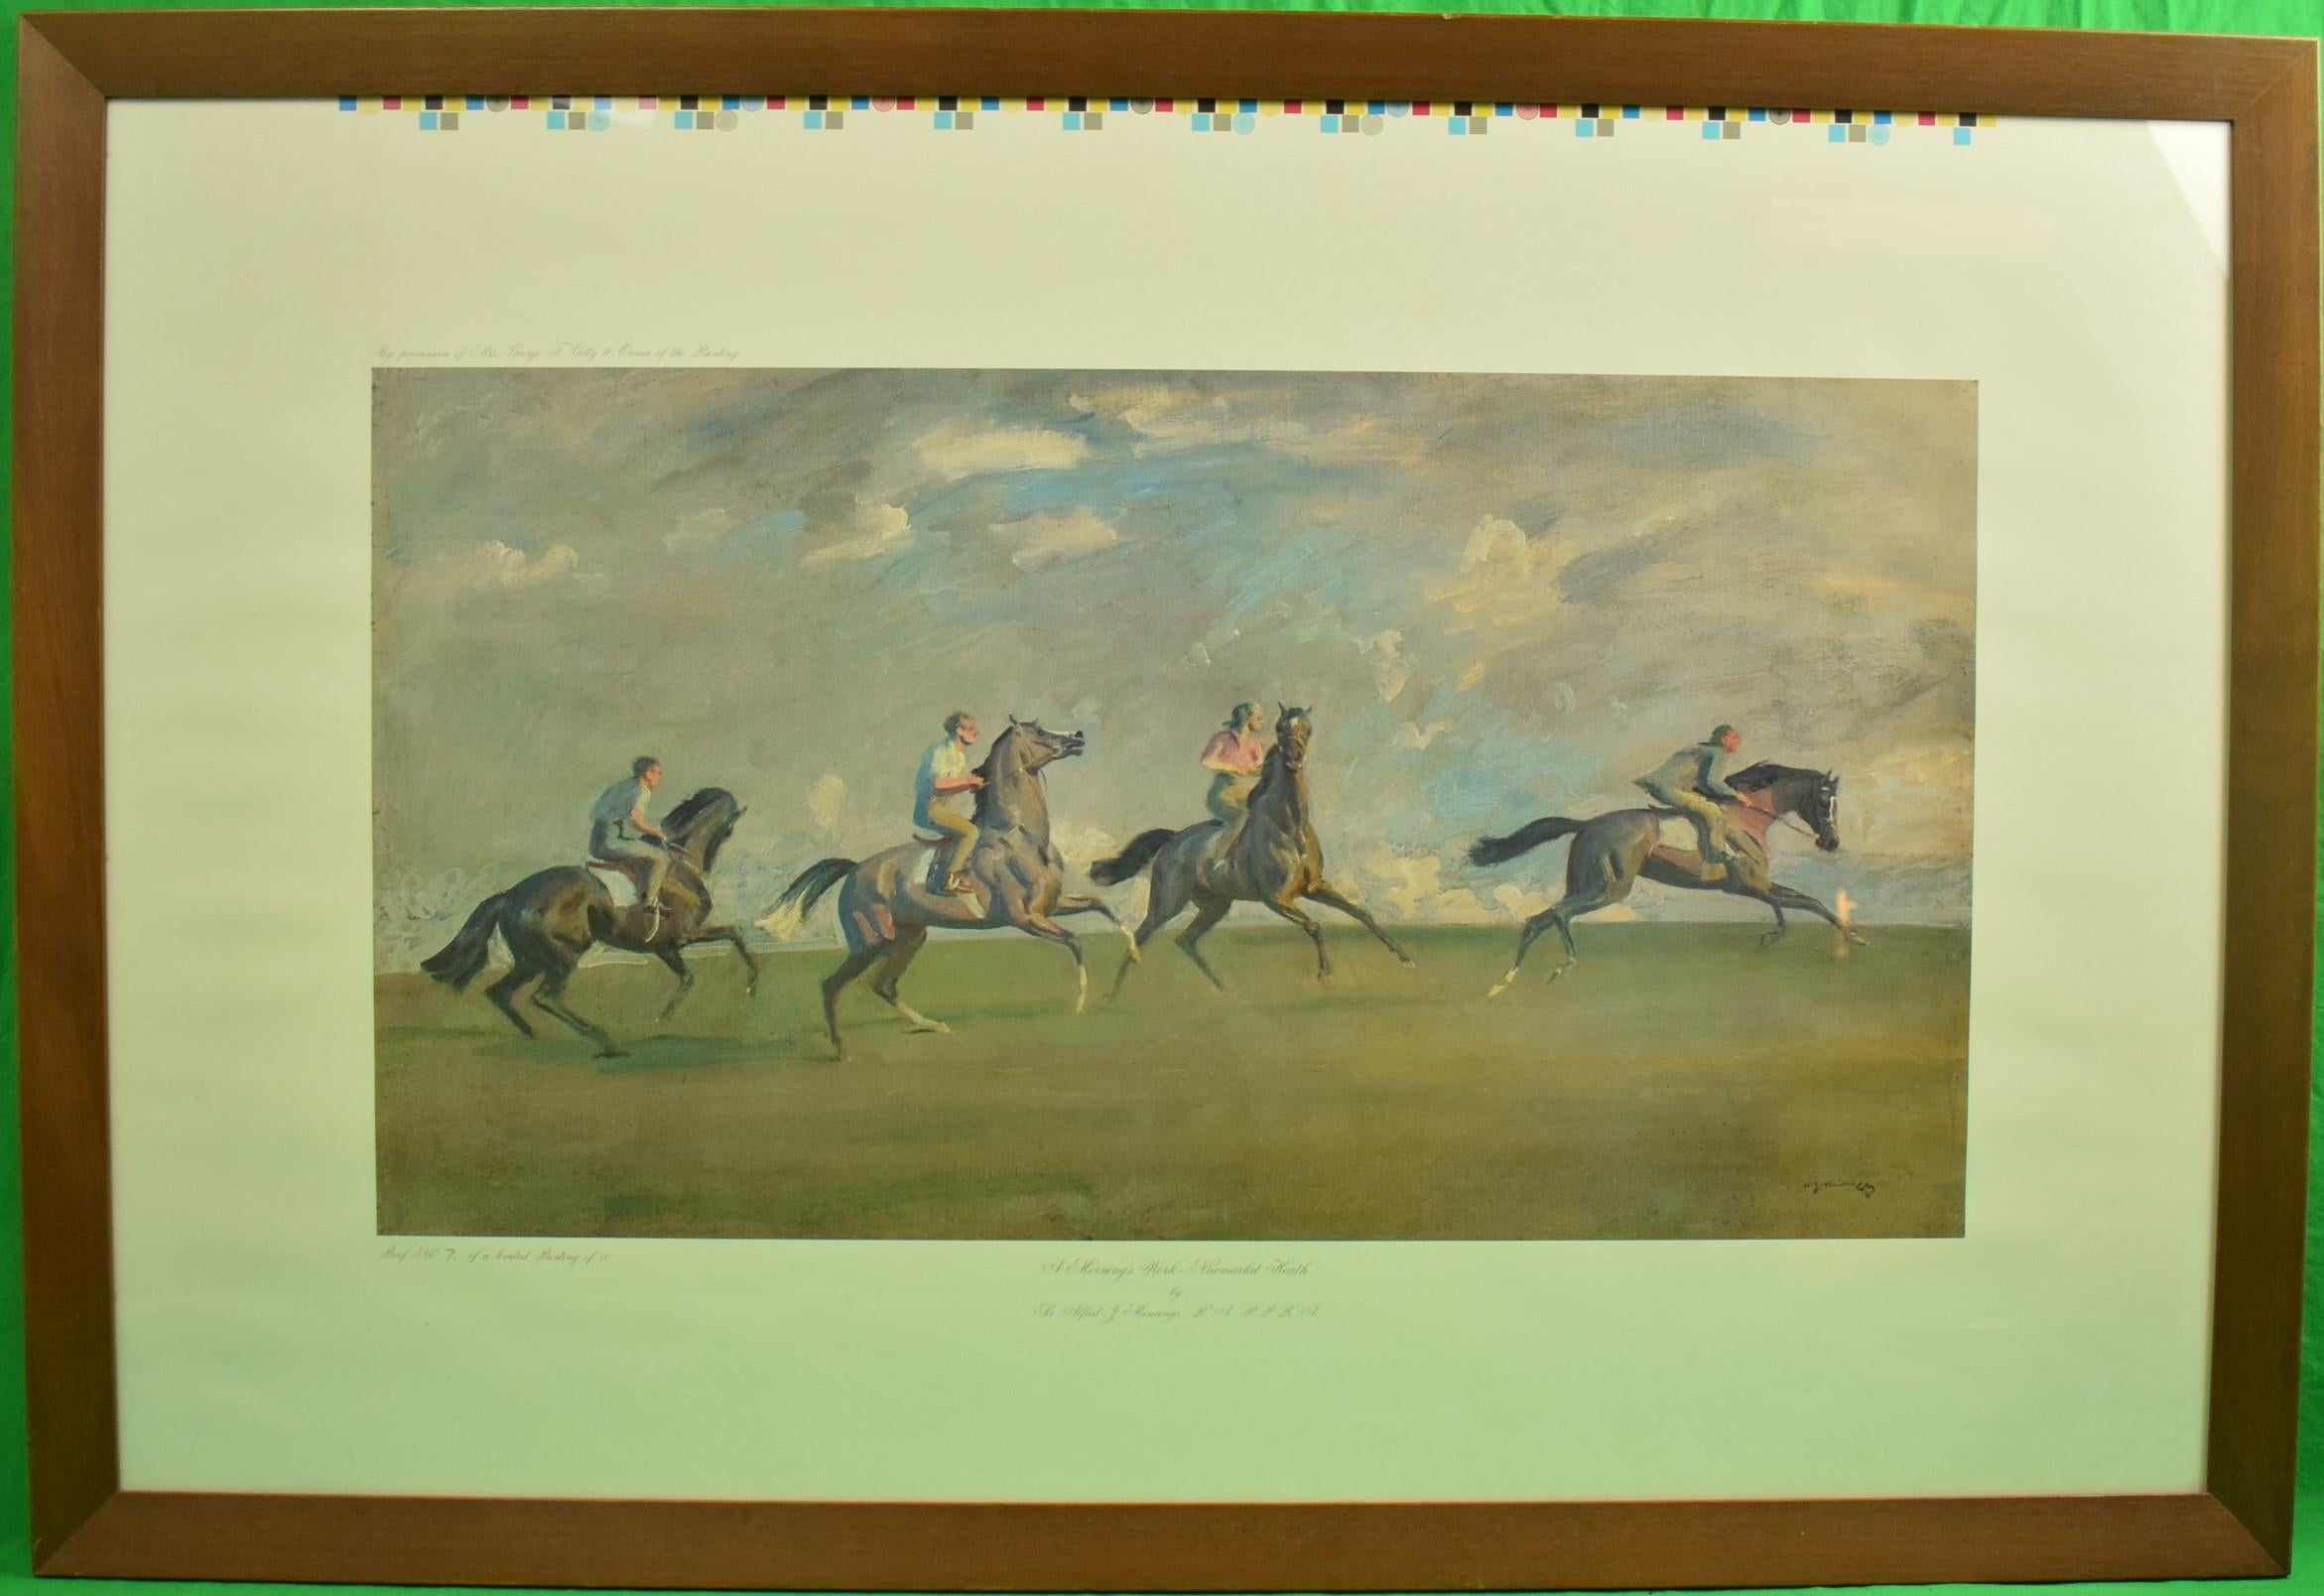 A Morning's Work-Newmarket Heath by Sir Alfred J. Munnings